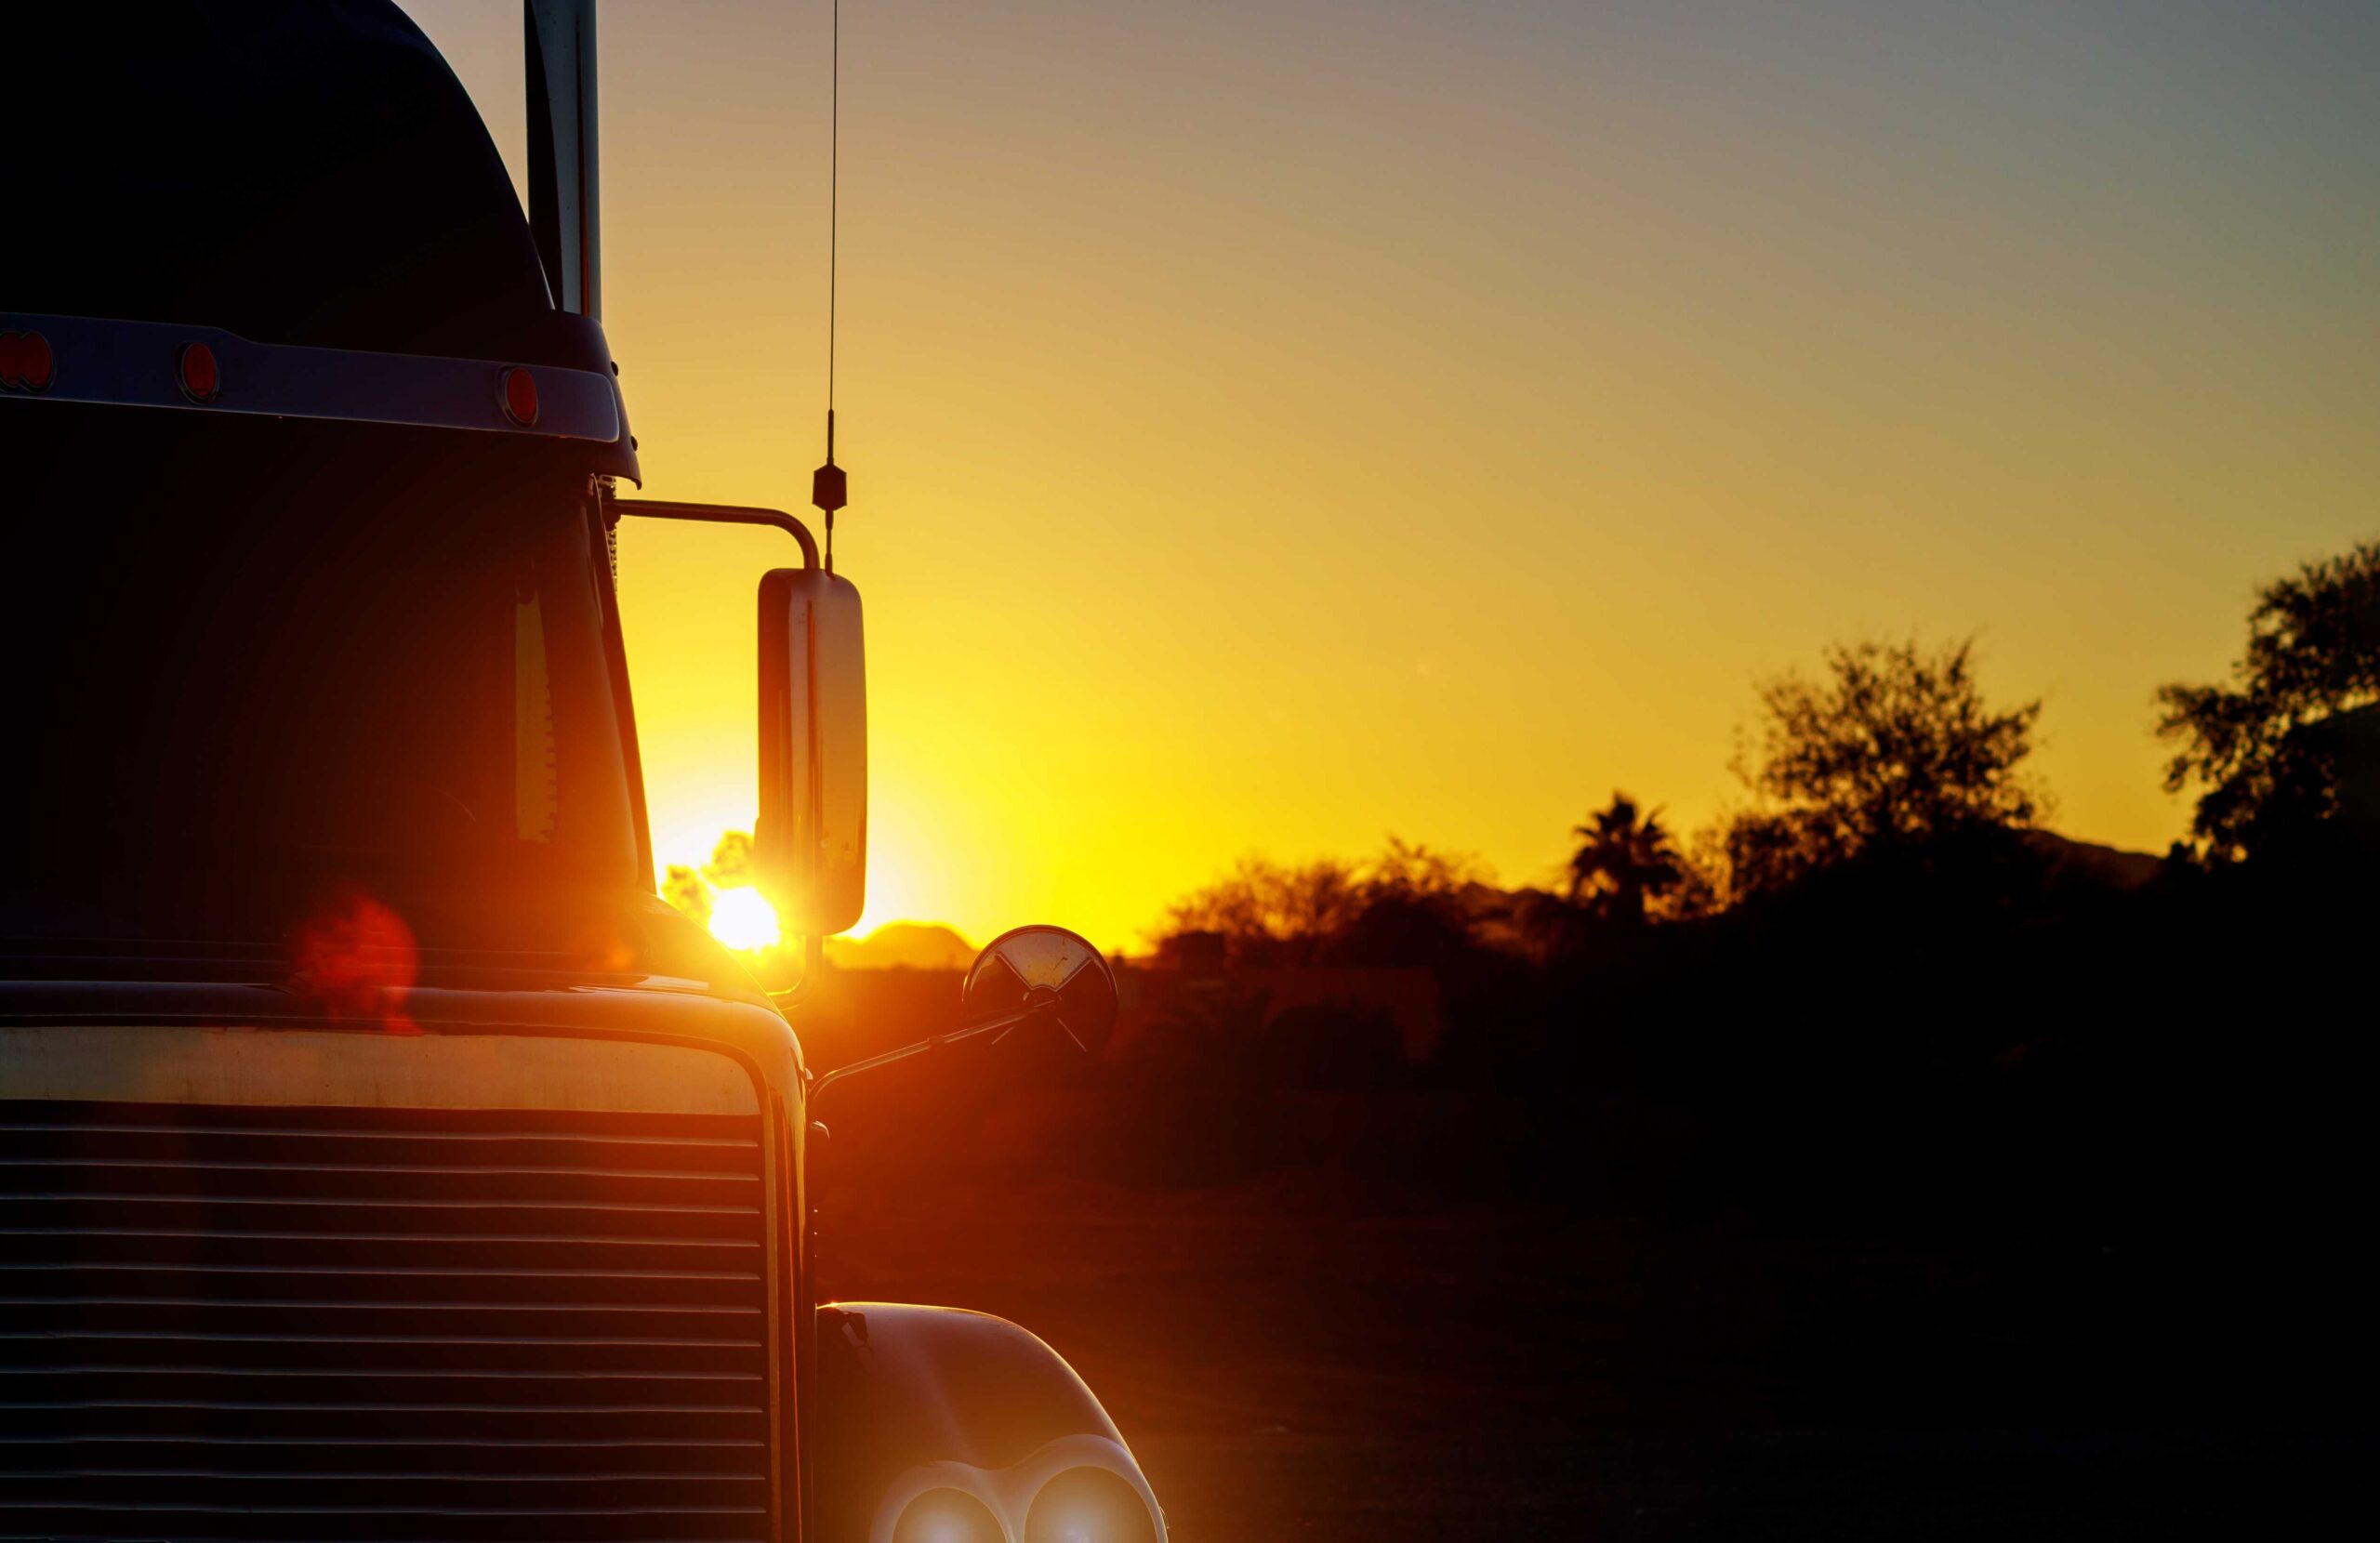 close up shot the front of a truck against sunset 2022 11 12 10 41 21 utc_optimized scaled